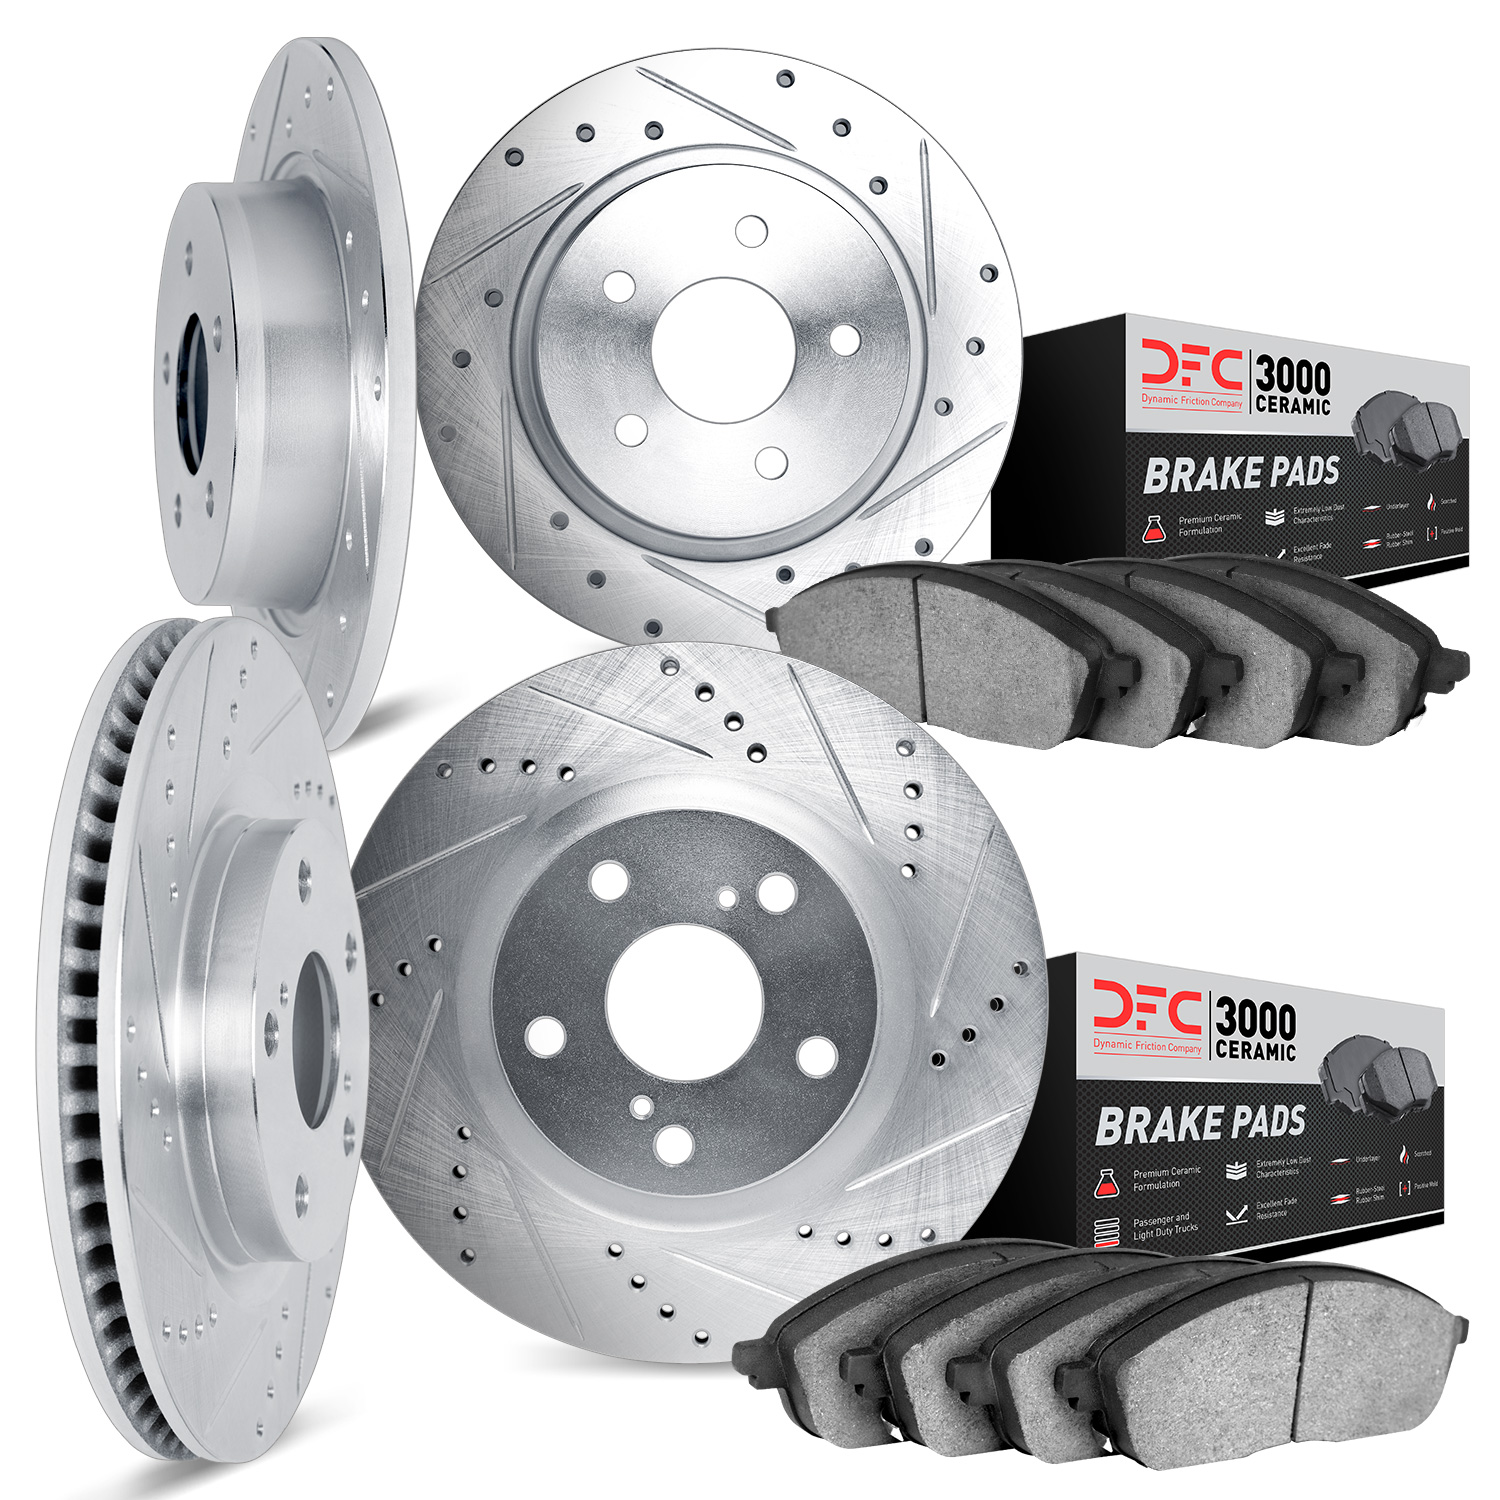 7304-80044 Drilled/Slotted Brake Rotor with 3000-Series Ceramic Brake Pads Kit [Silver], 2014-2016 Ford/Lincoln/Mercury/Mazda, P